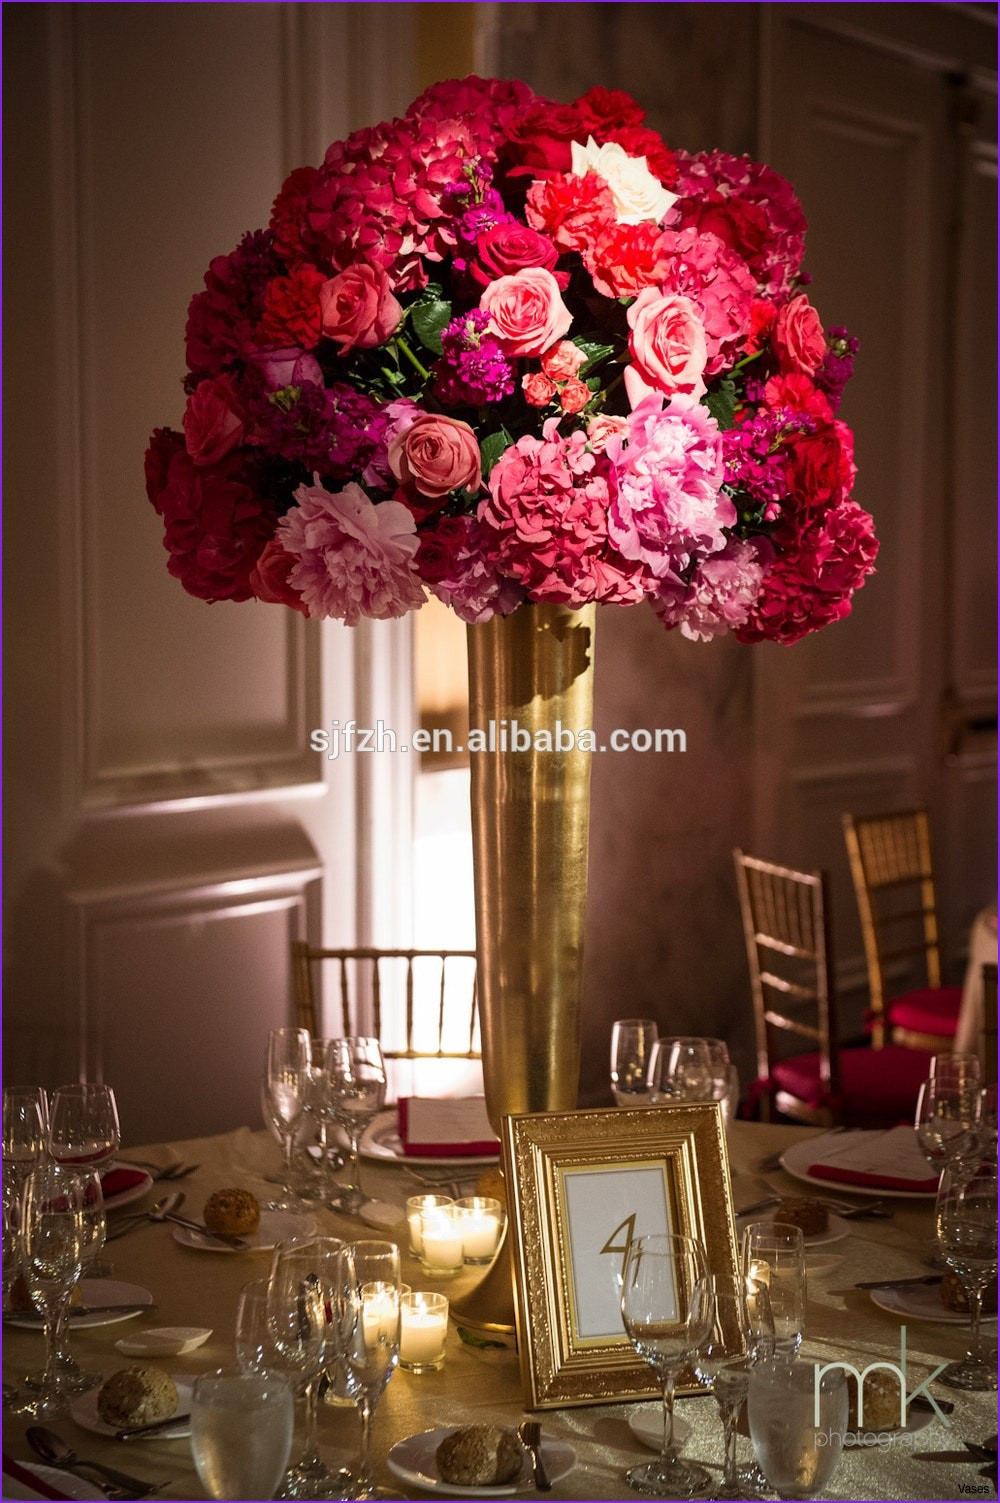 14 Perfect Vase Centerpiece Ideas for Weddings 2024 free download vase centerpiece ideas for weddings of red and white wedding decorations inspirational table centerpiece with red and white wedding decorations inspirational table centerpiece ideas resplend